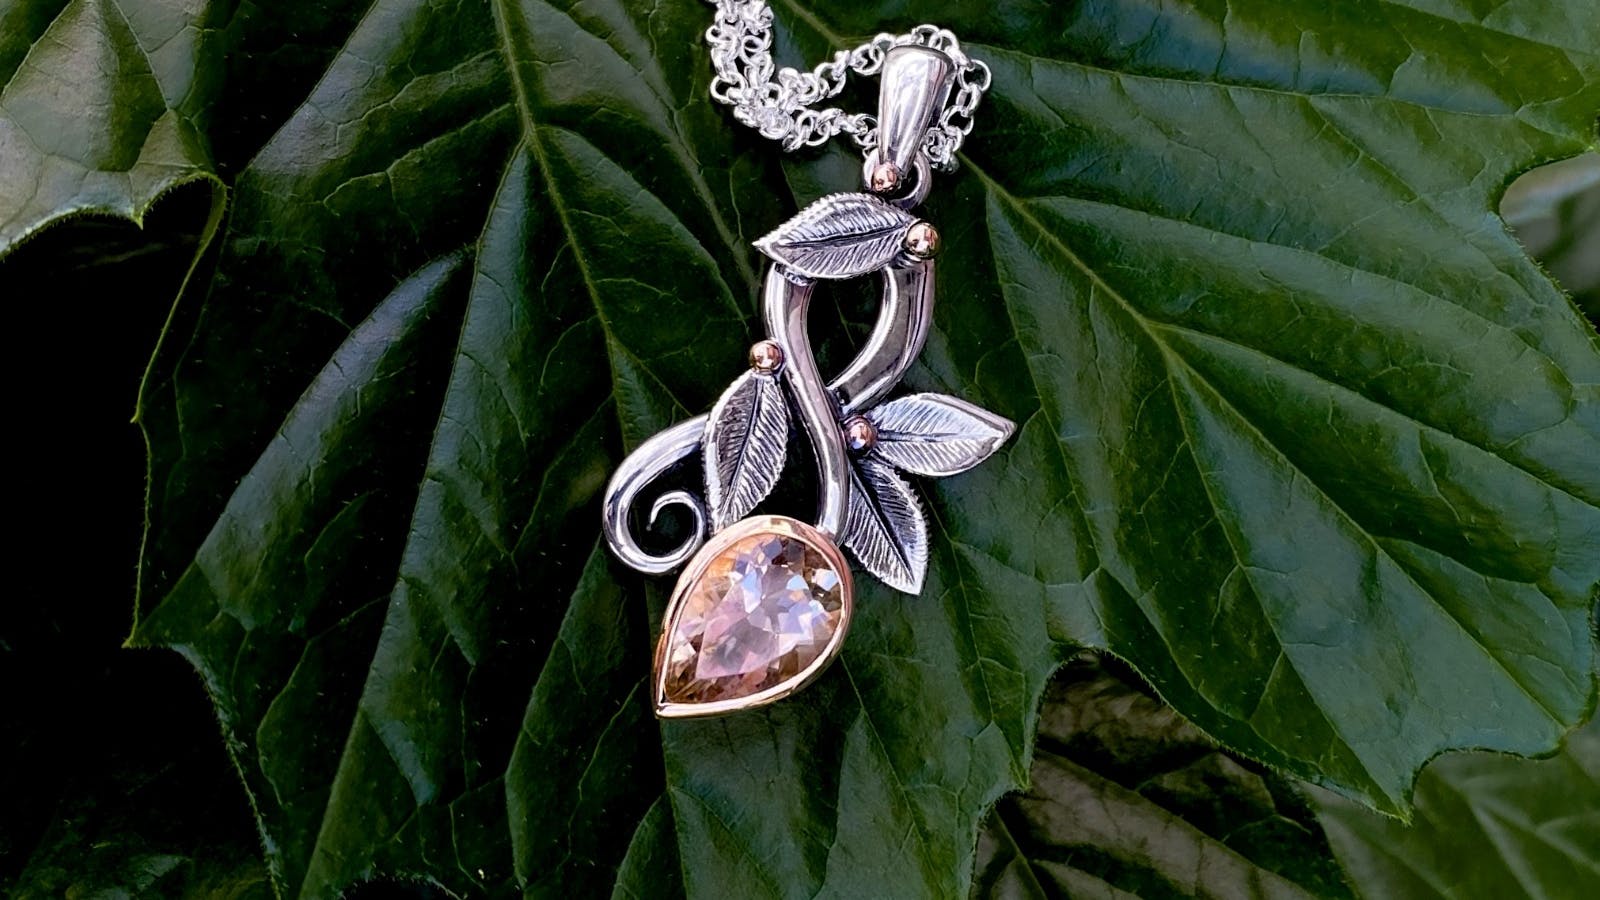 New flourish necklace with pink zircon set in silver floral embellishments by Emily Duggan